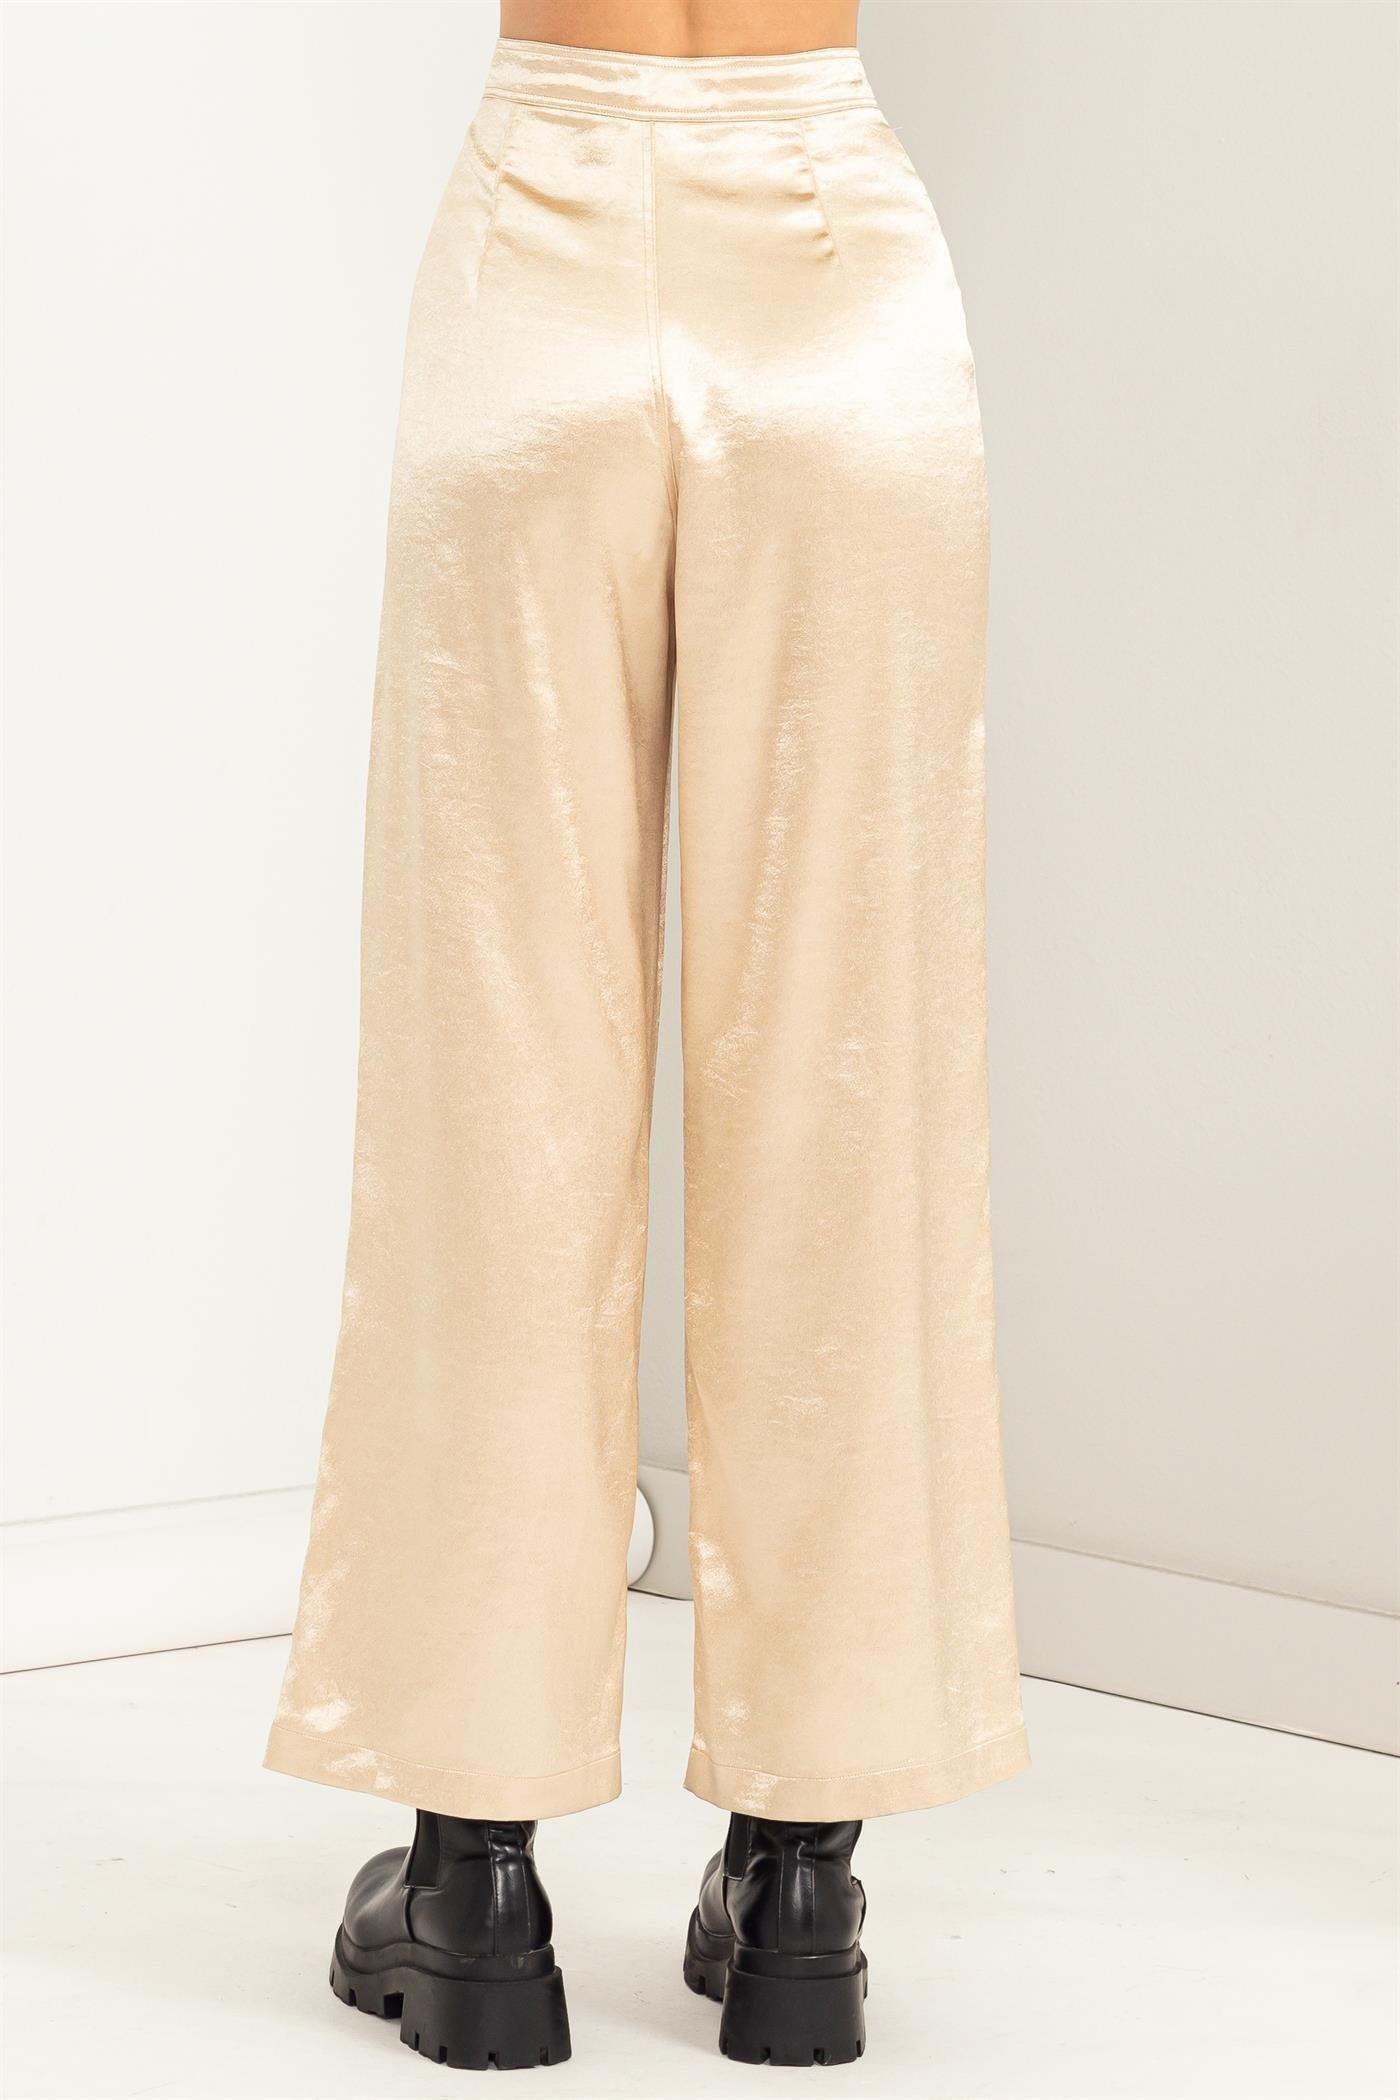 high waist satin pants - RK Collections Boutique